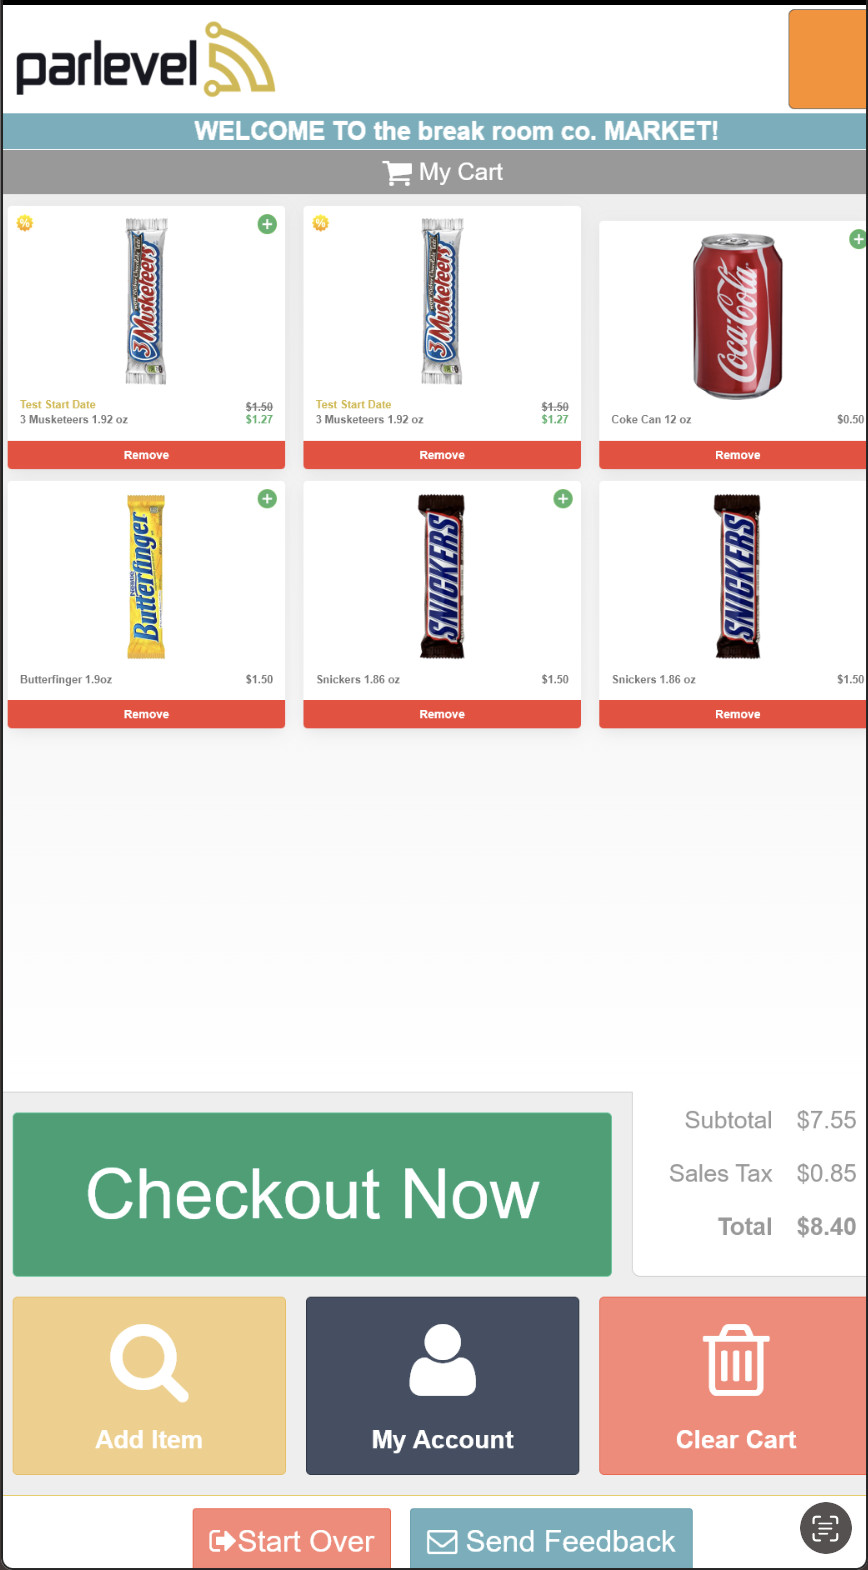 Parlevel - Customer View - Cart with Promotions.png